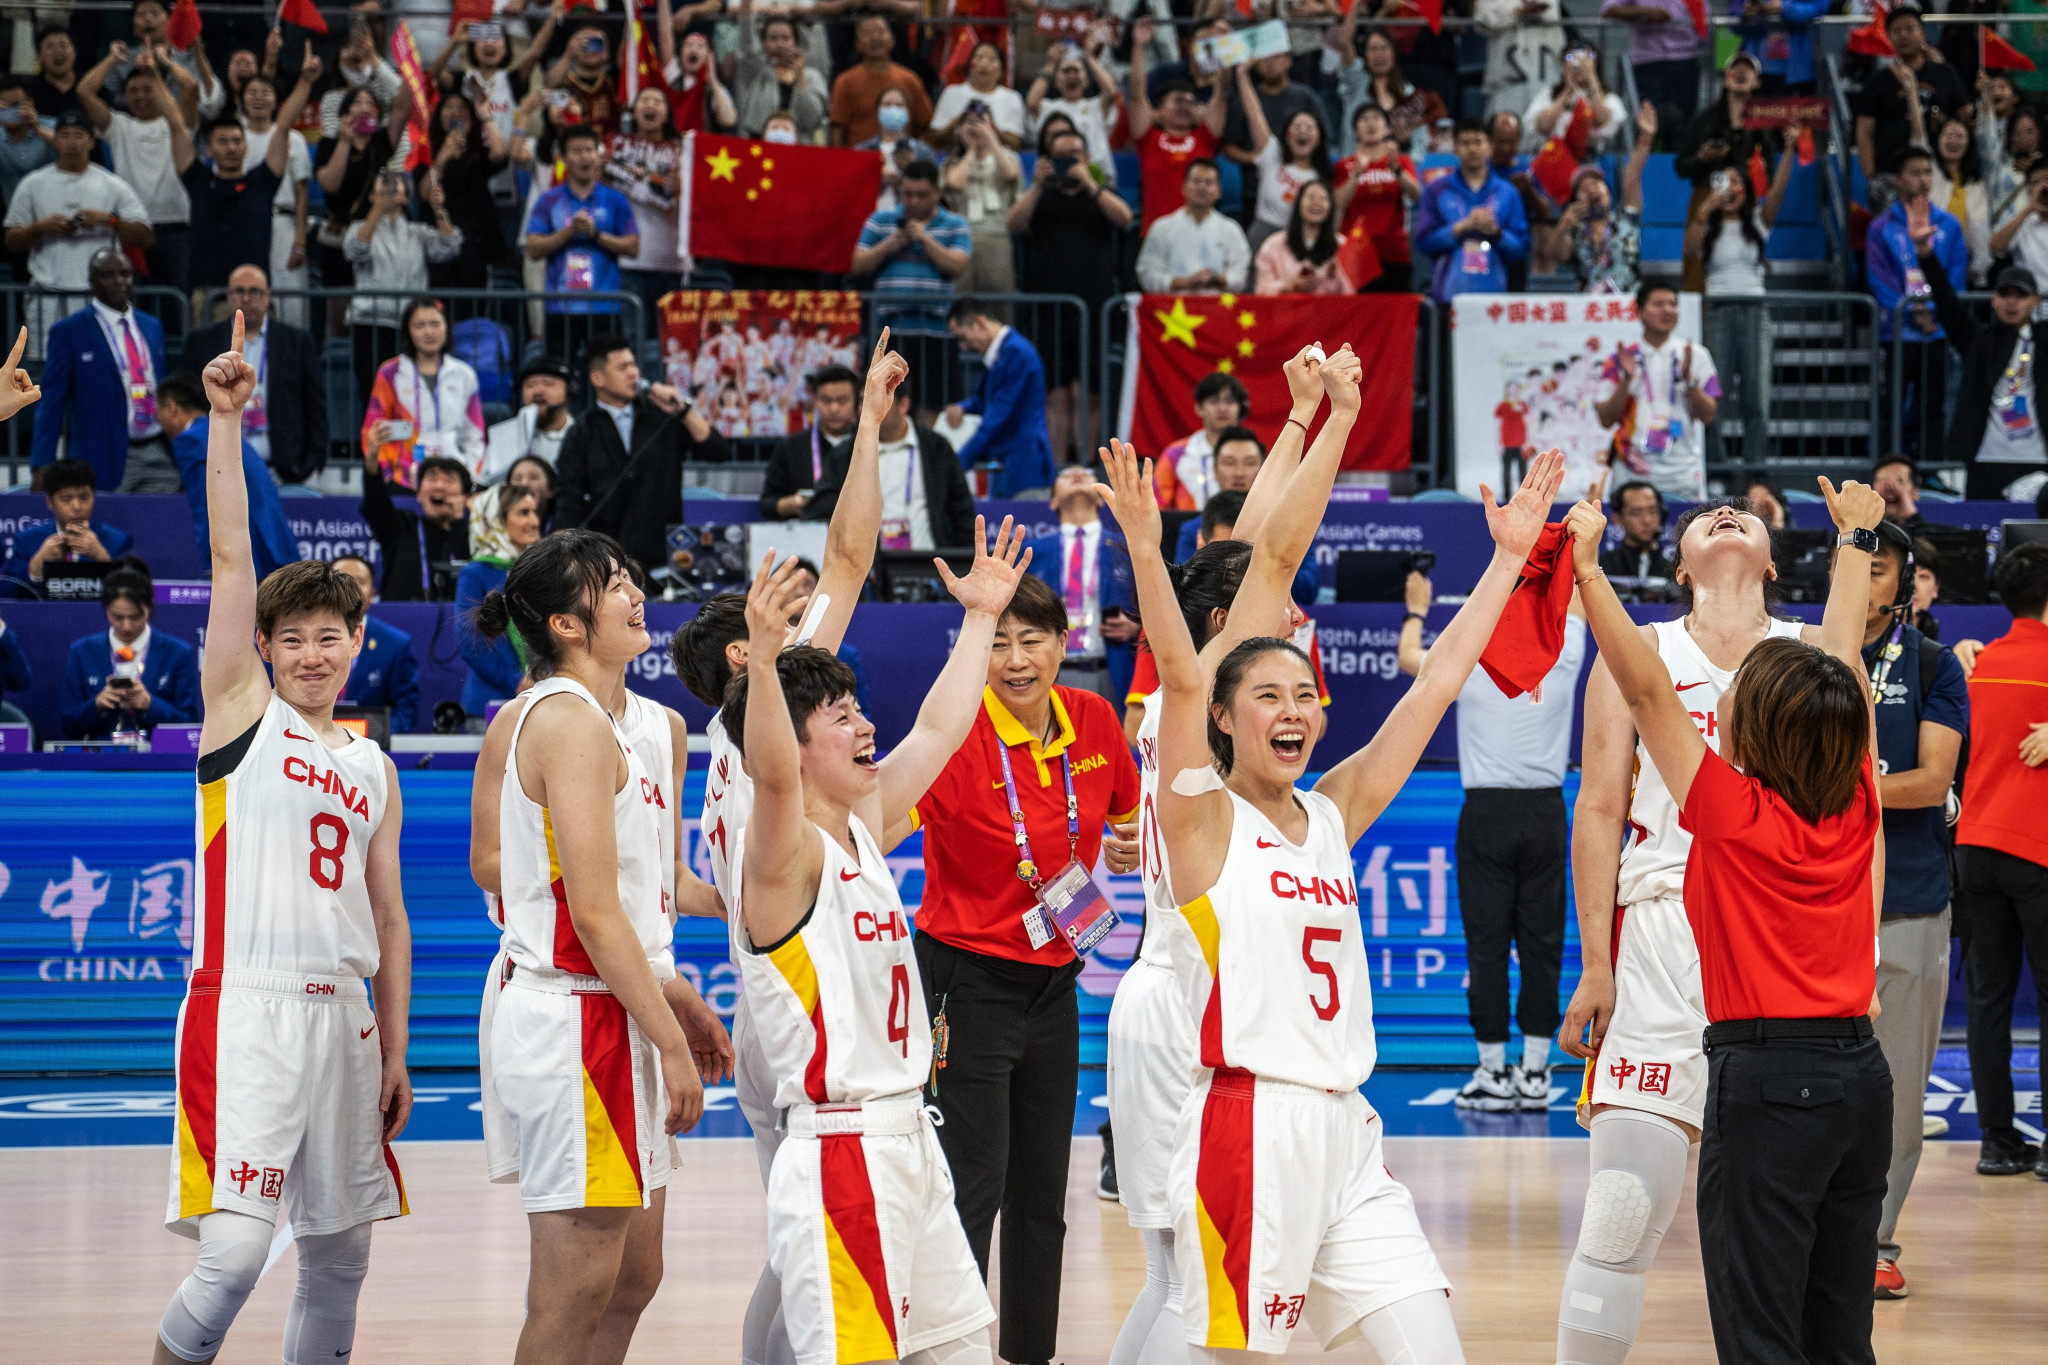 China overcame Japan in a thrilling women's basketball final in Hangzhou ©Getty Images